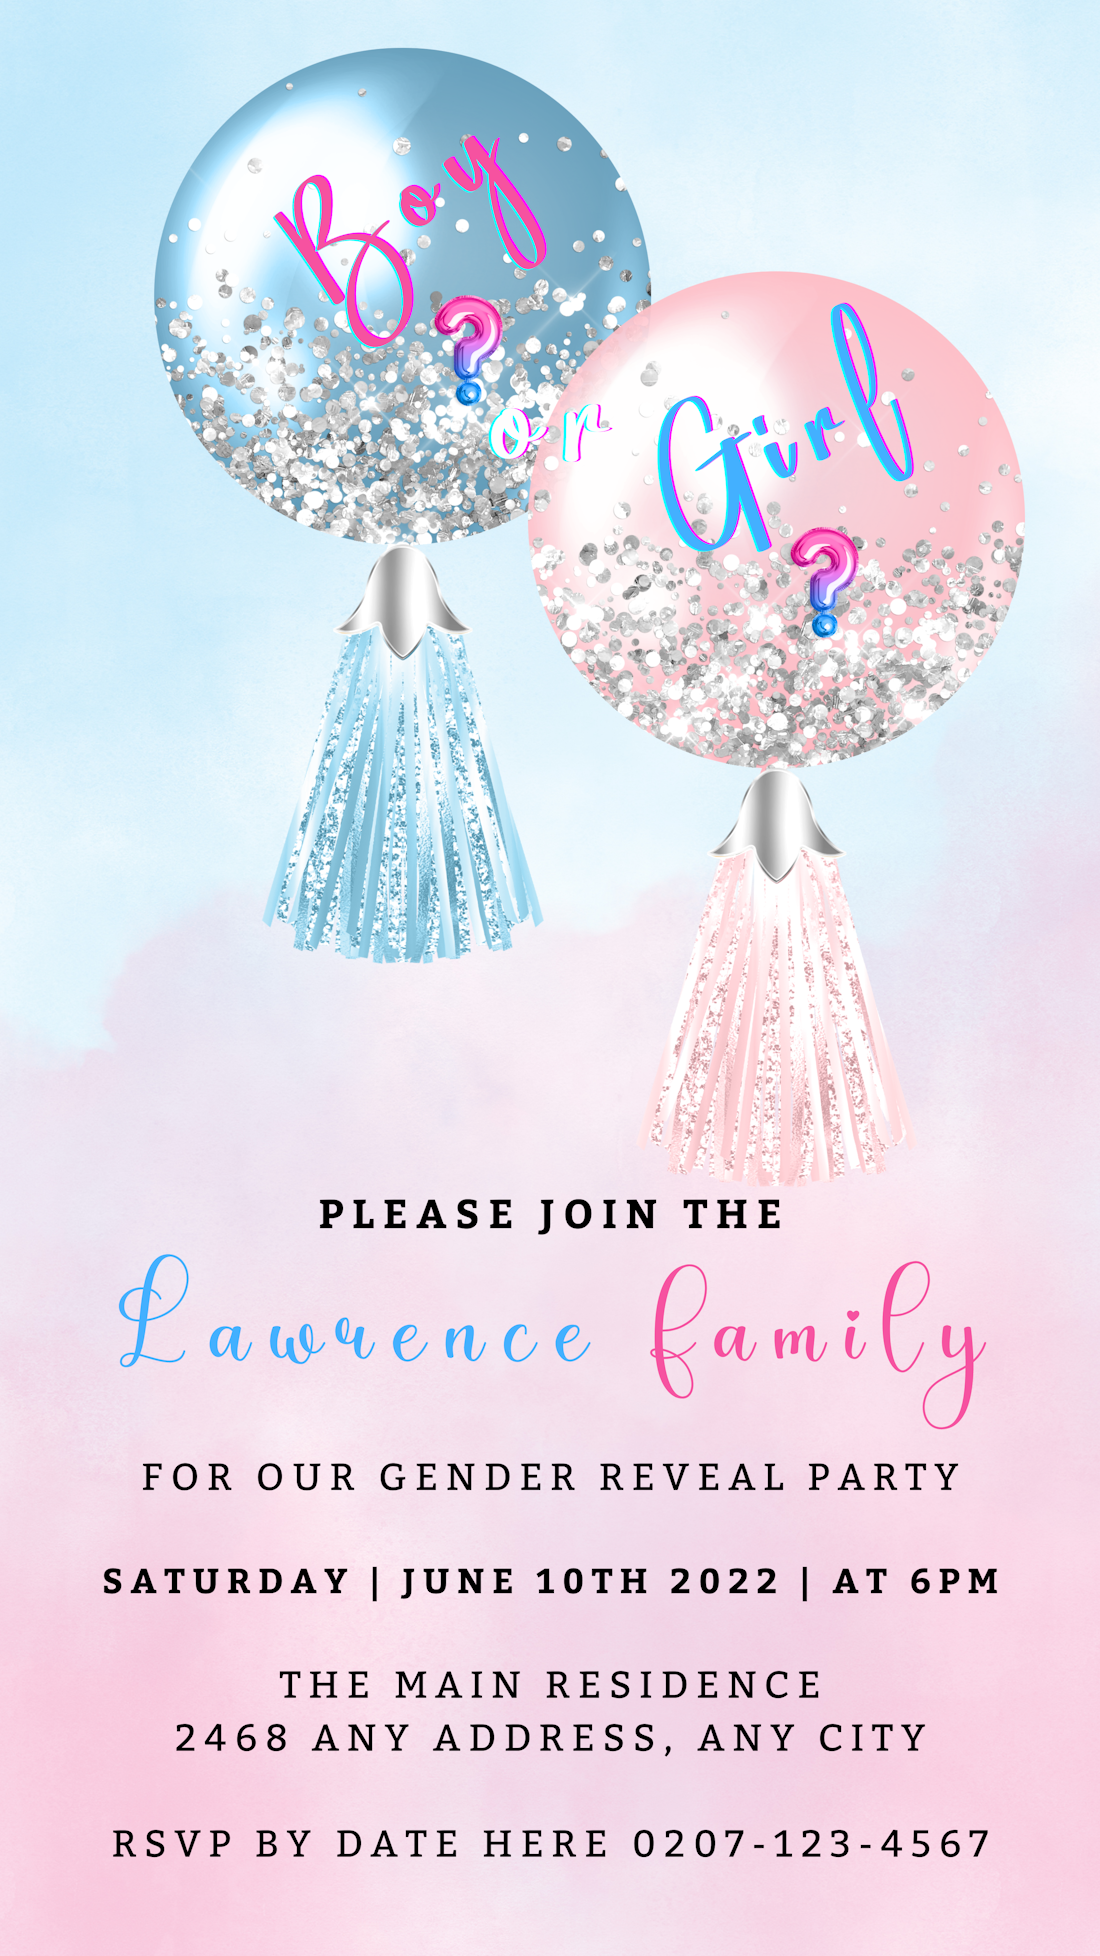 Customisable digital gender reveal invitation with pink and blue balloons and confetti, editable via Canva for smartphones, tablets, and PCs.